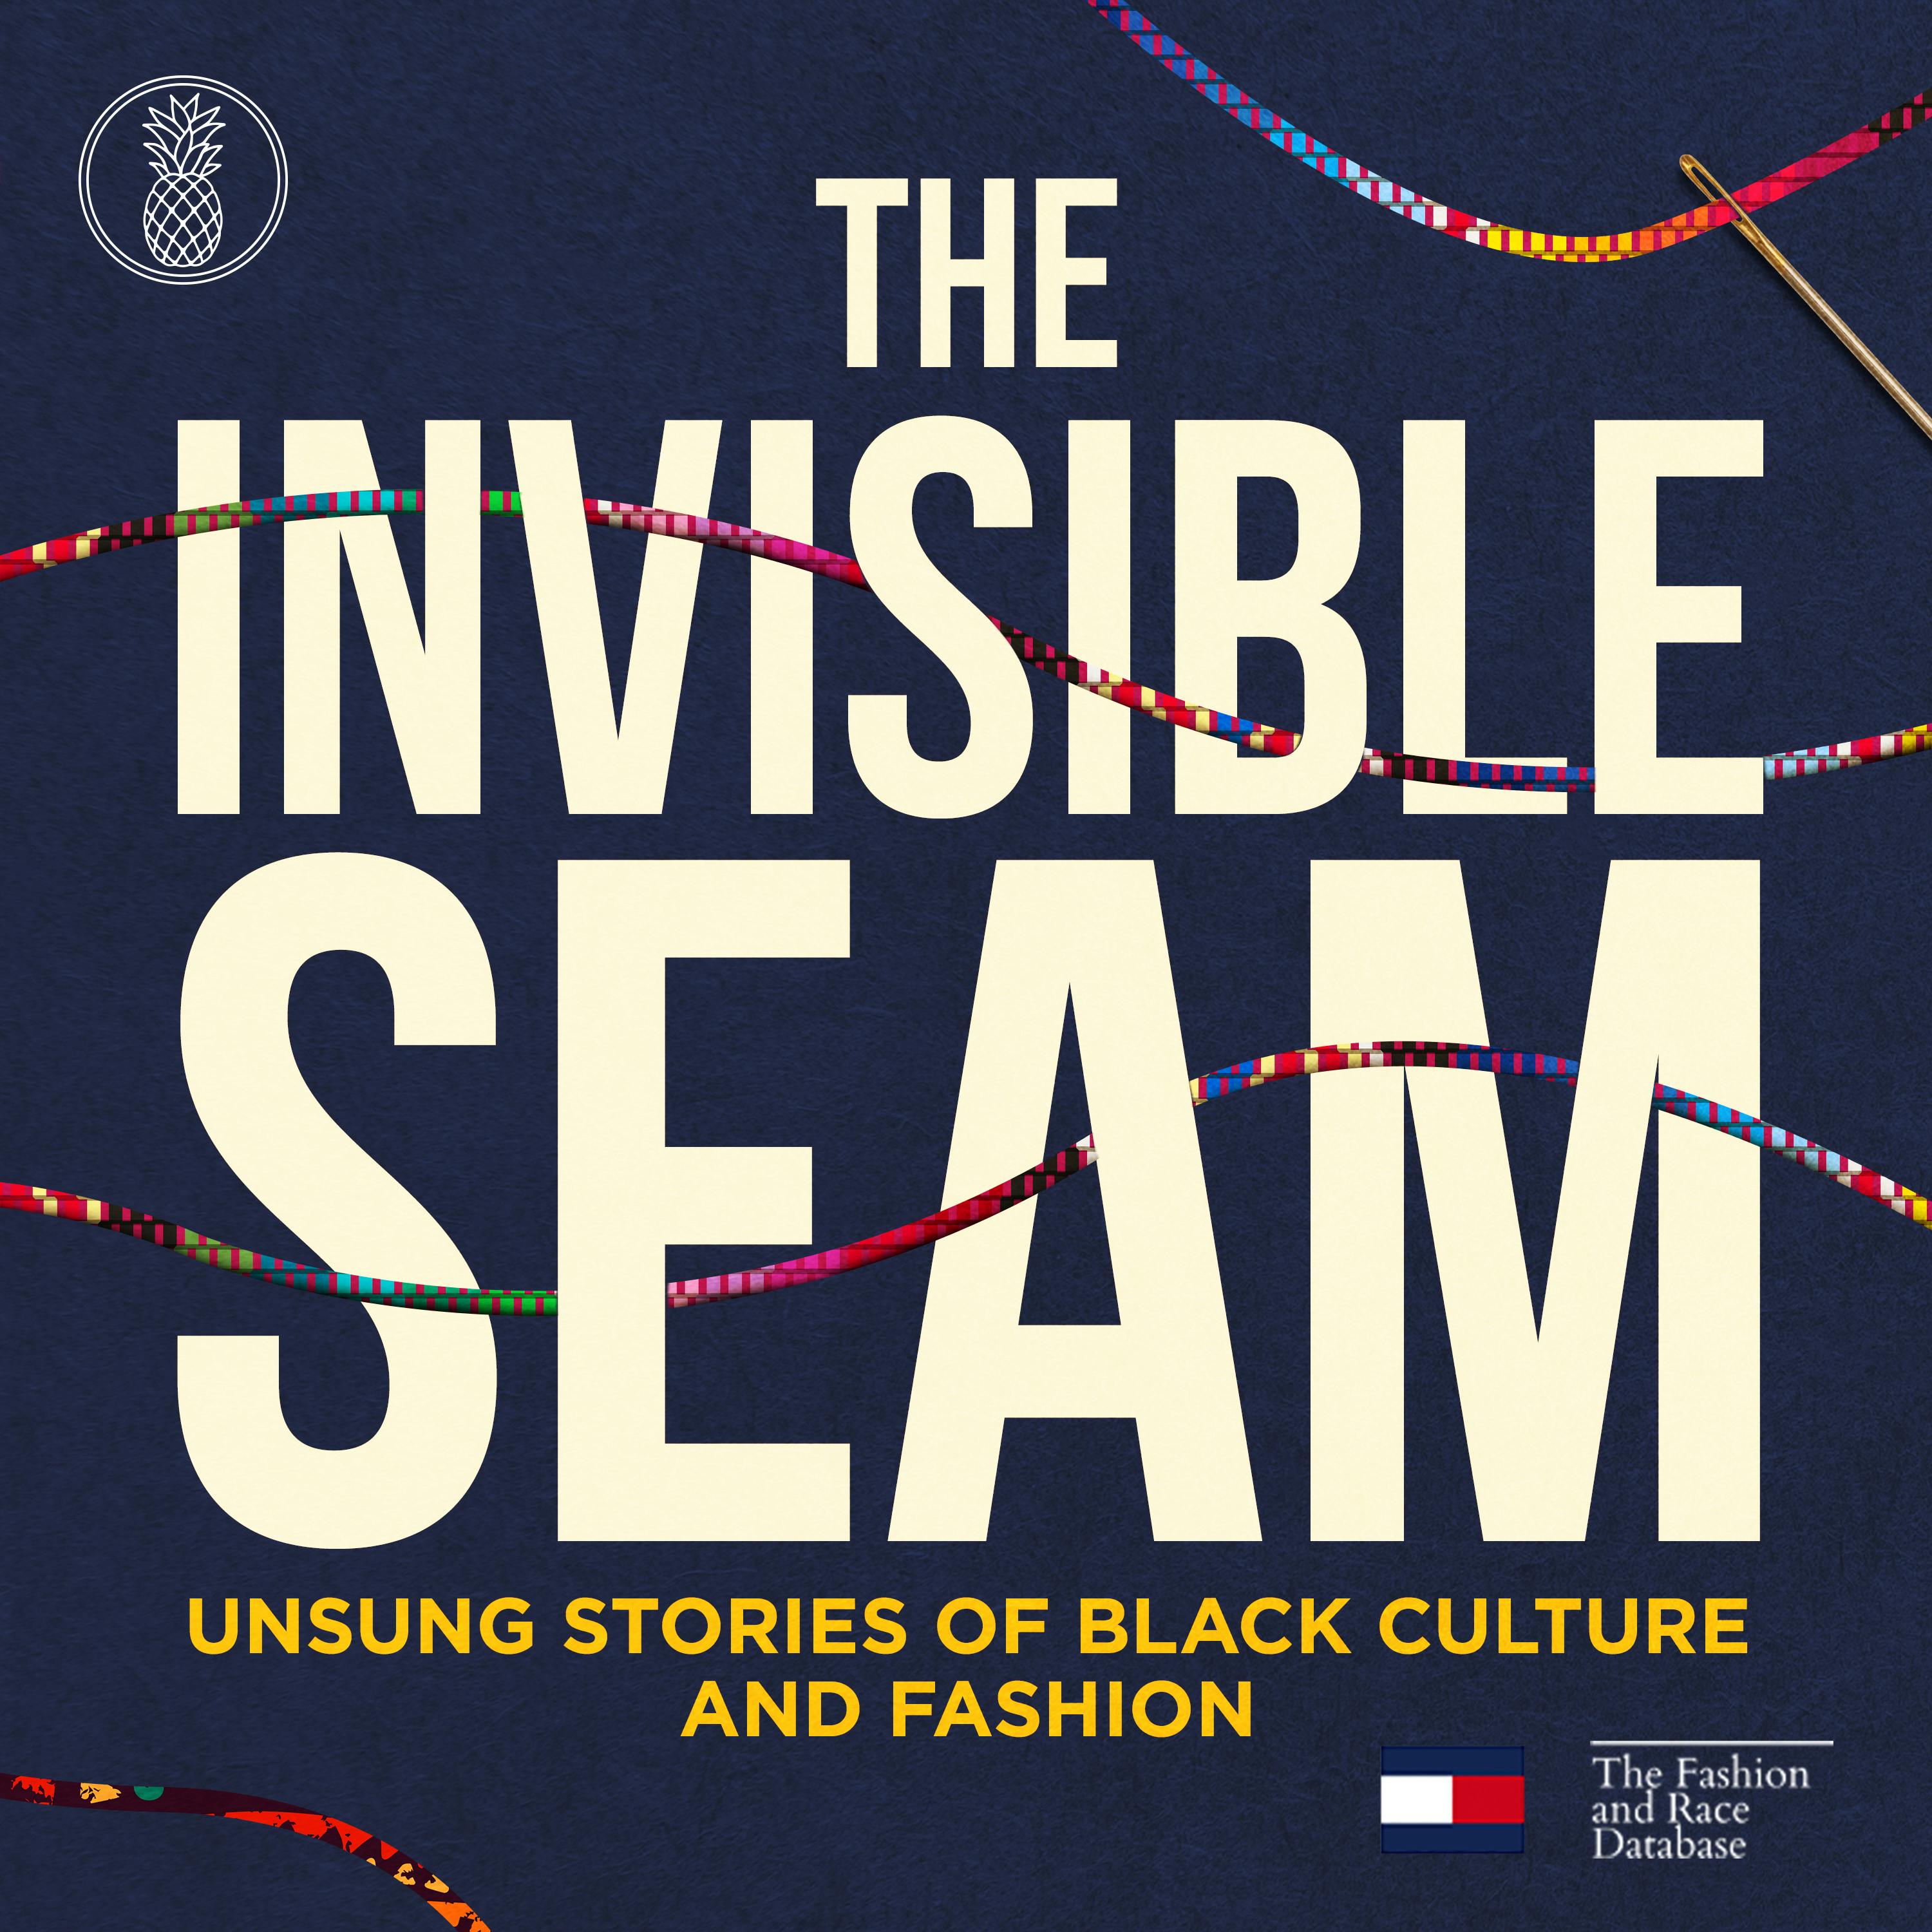 Introducing: The Invisible Seam